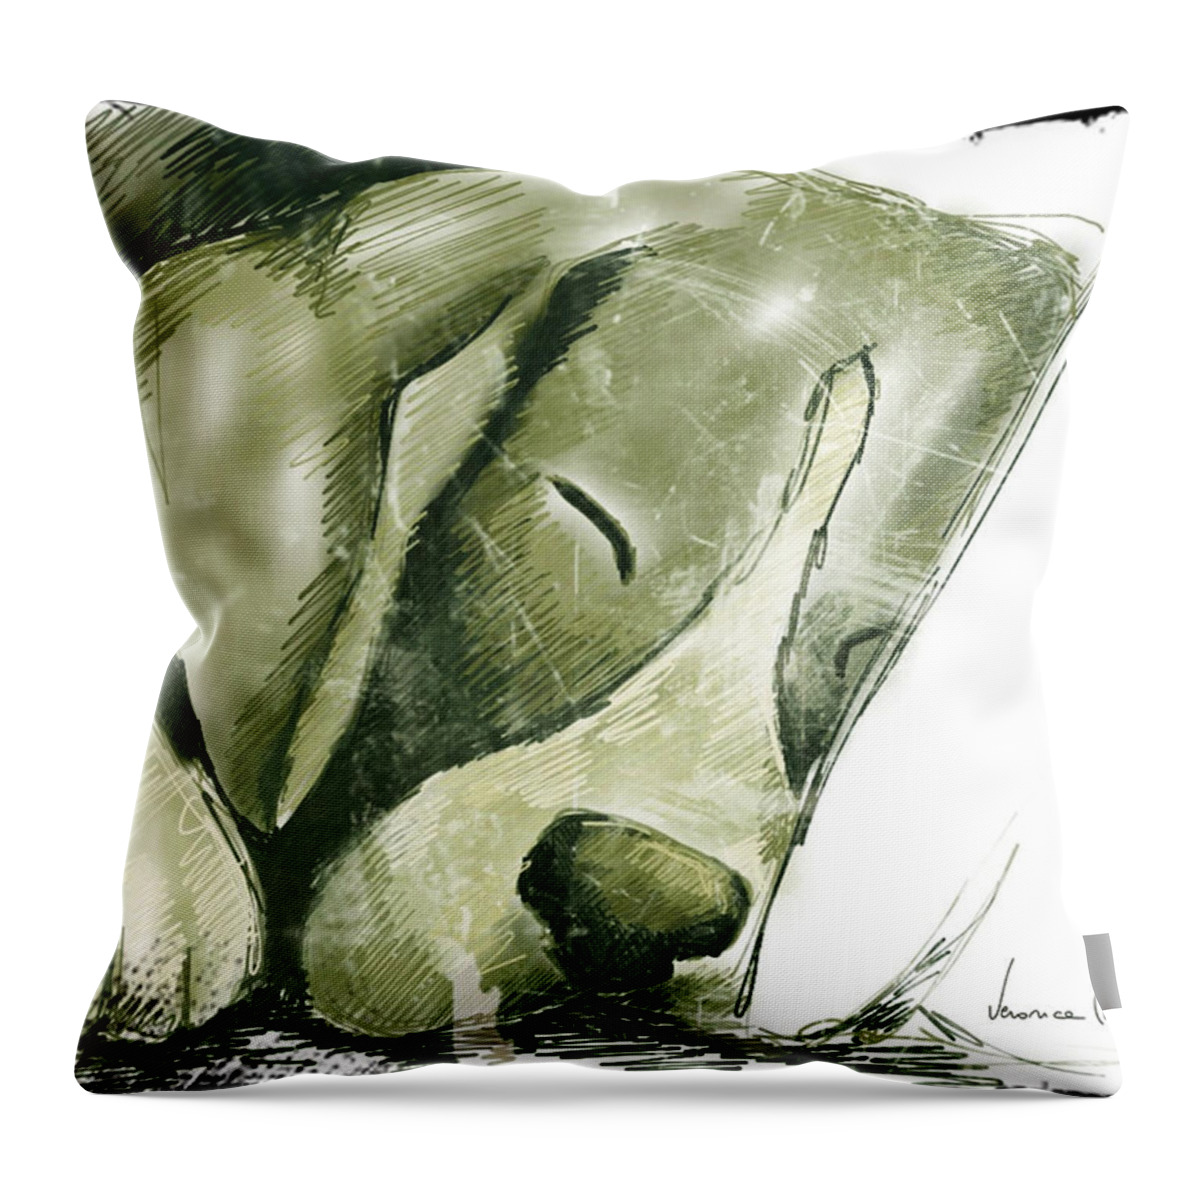 Ipad Throw Pillow featuring the painting My dog by Veronica Minozzi